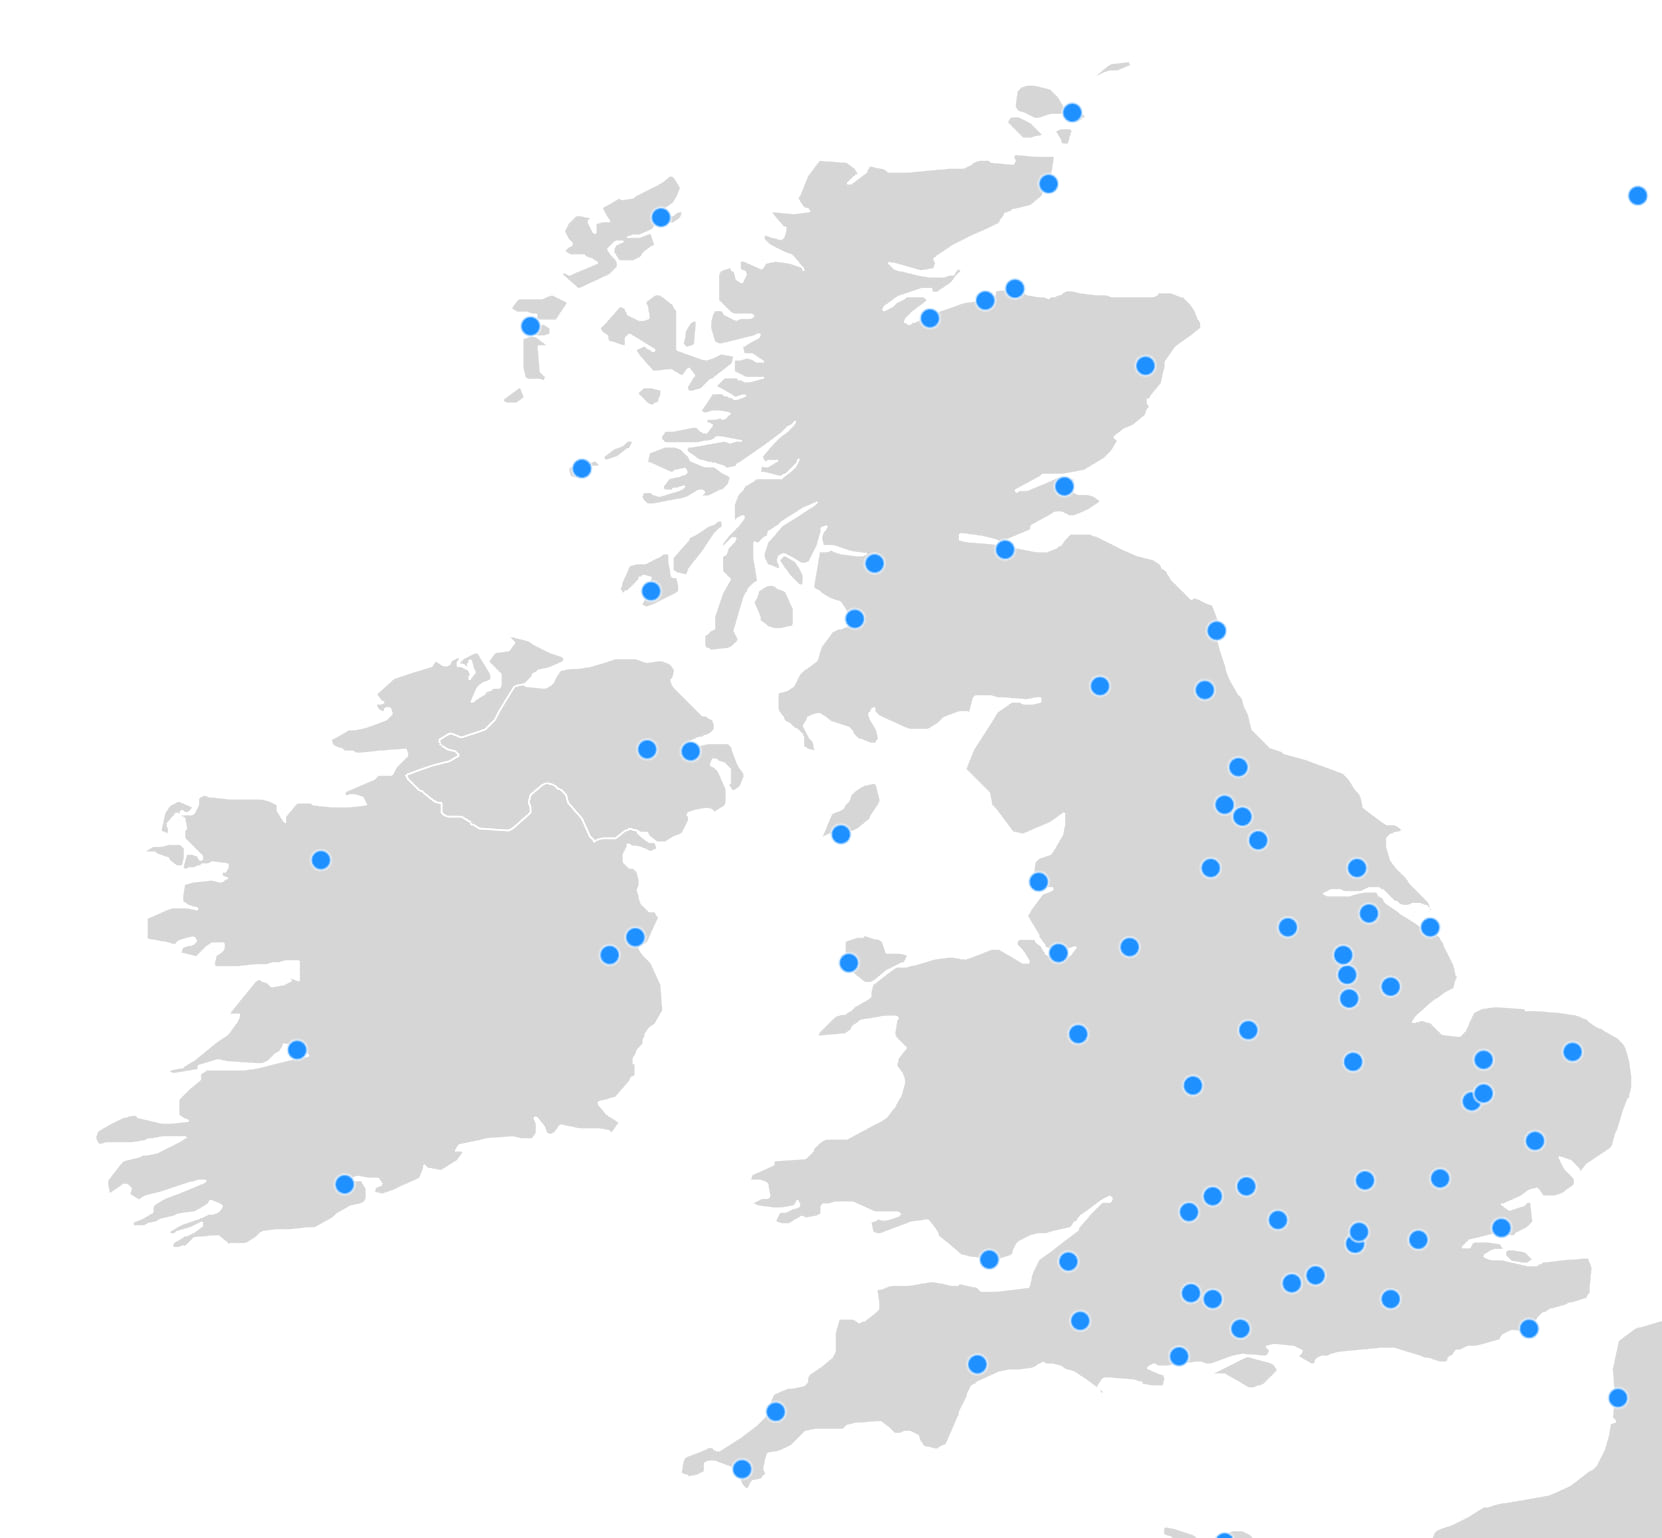 UK weather stations. Each point is clearly visible at 10px.